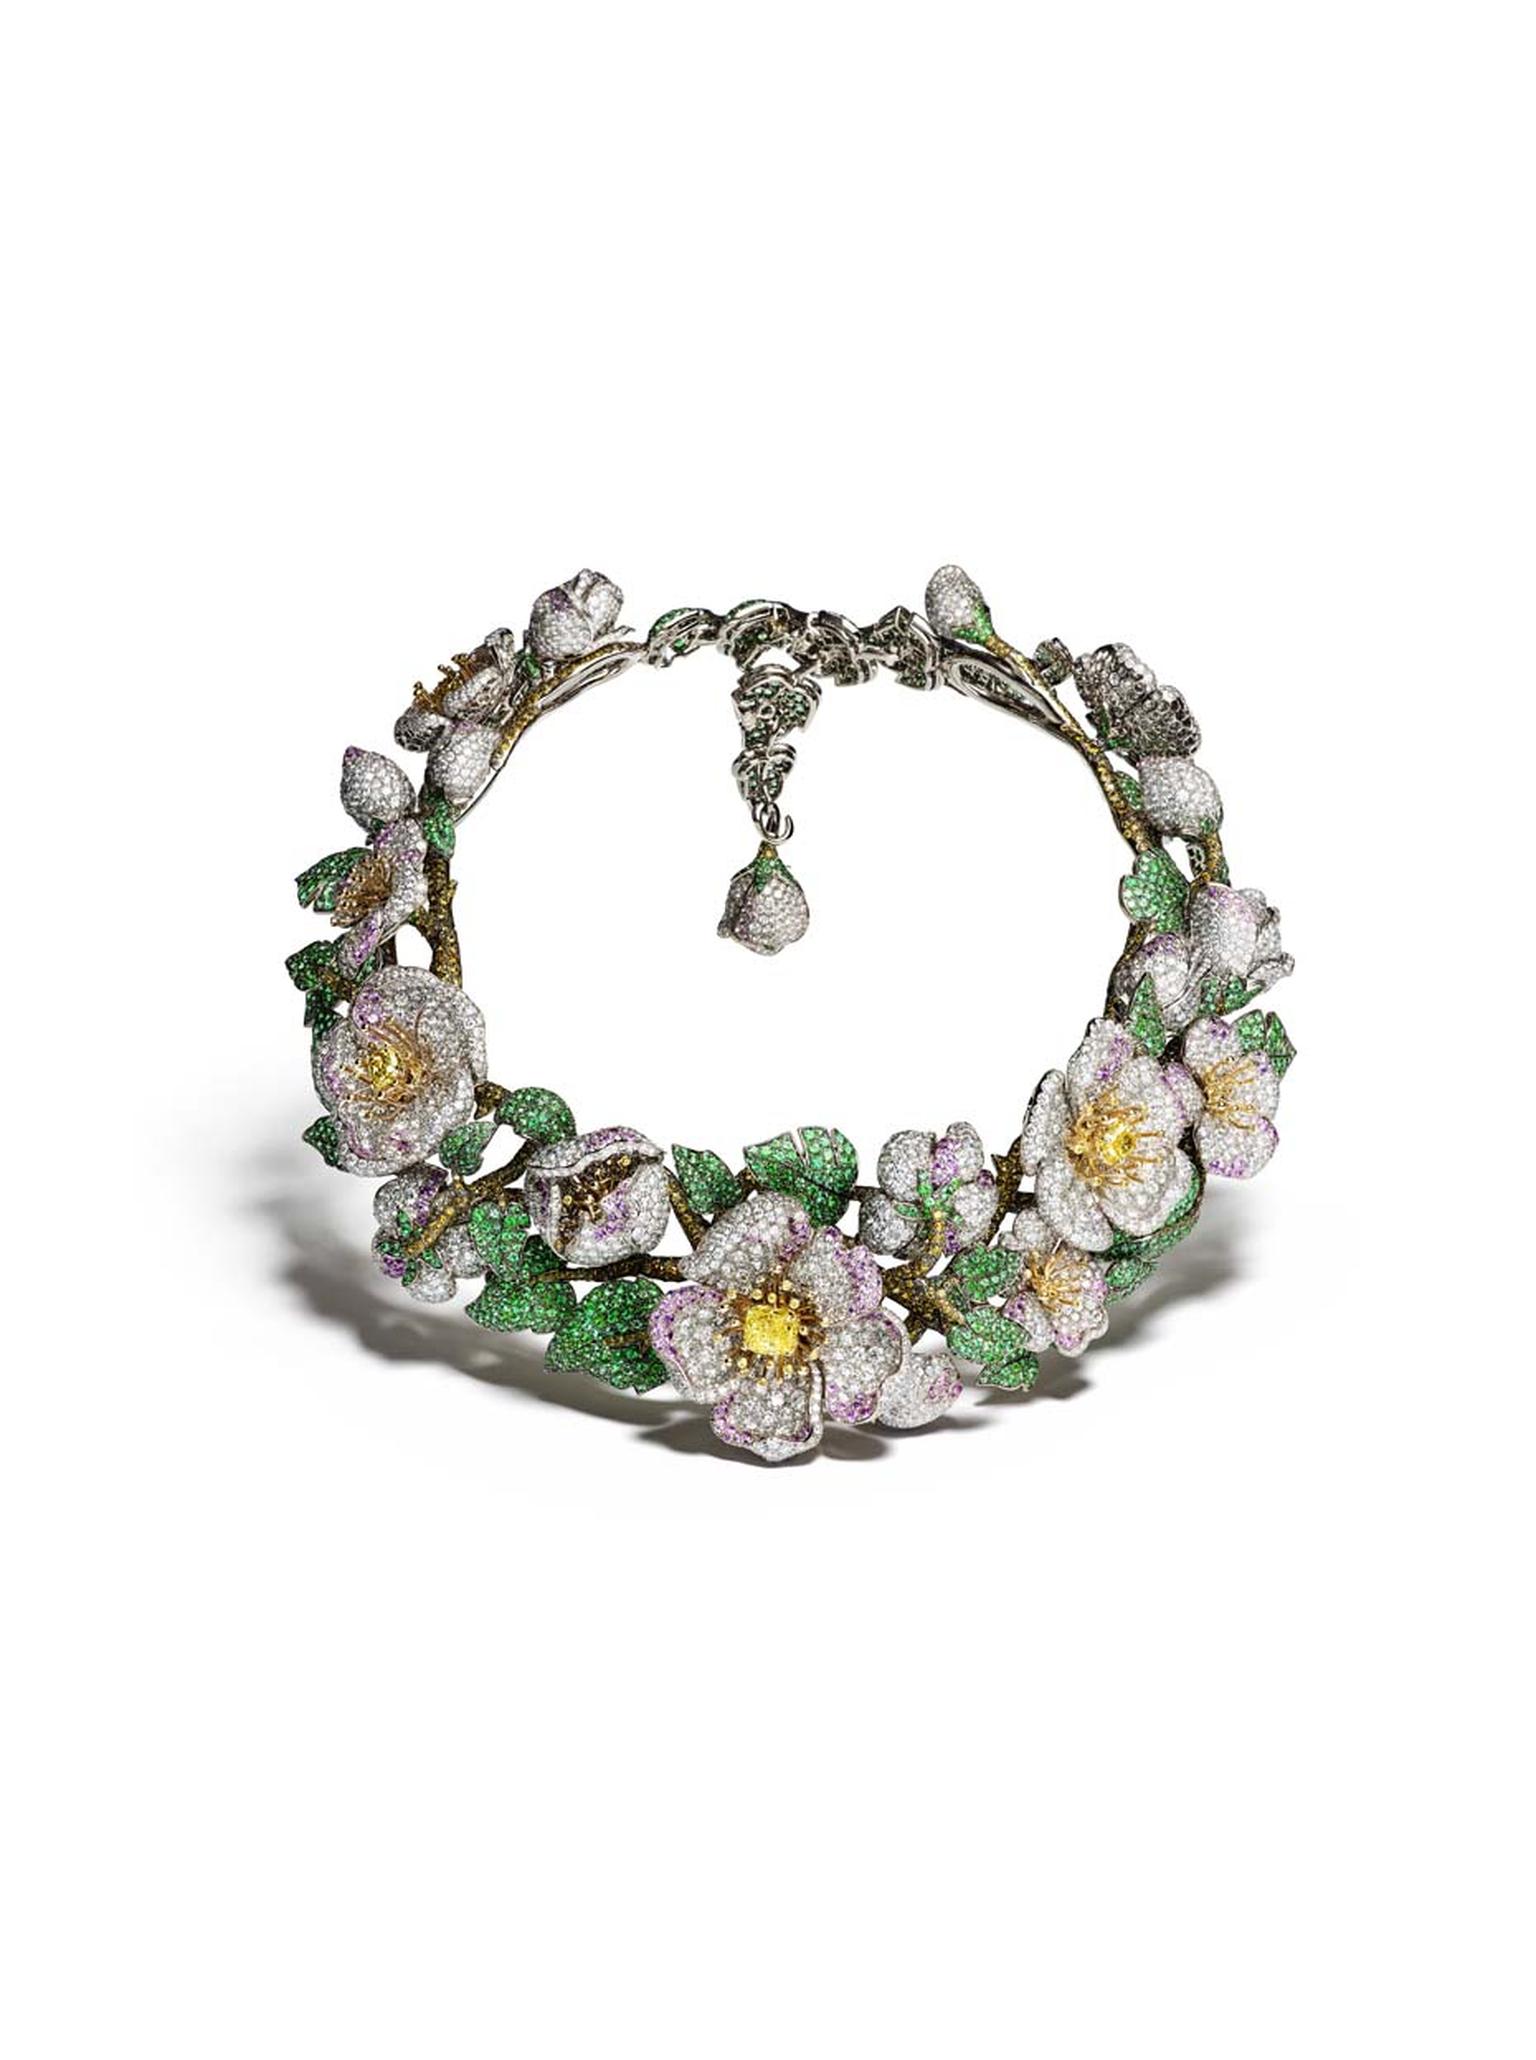 Giampiero Bodino Primavera necklace in white and yellow gold, set with five intense and vivid yellow diamonds, white, grey, yellow and cognac diamonds, pink sapphires and emeralds. Image by: Laziz Hamani